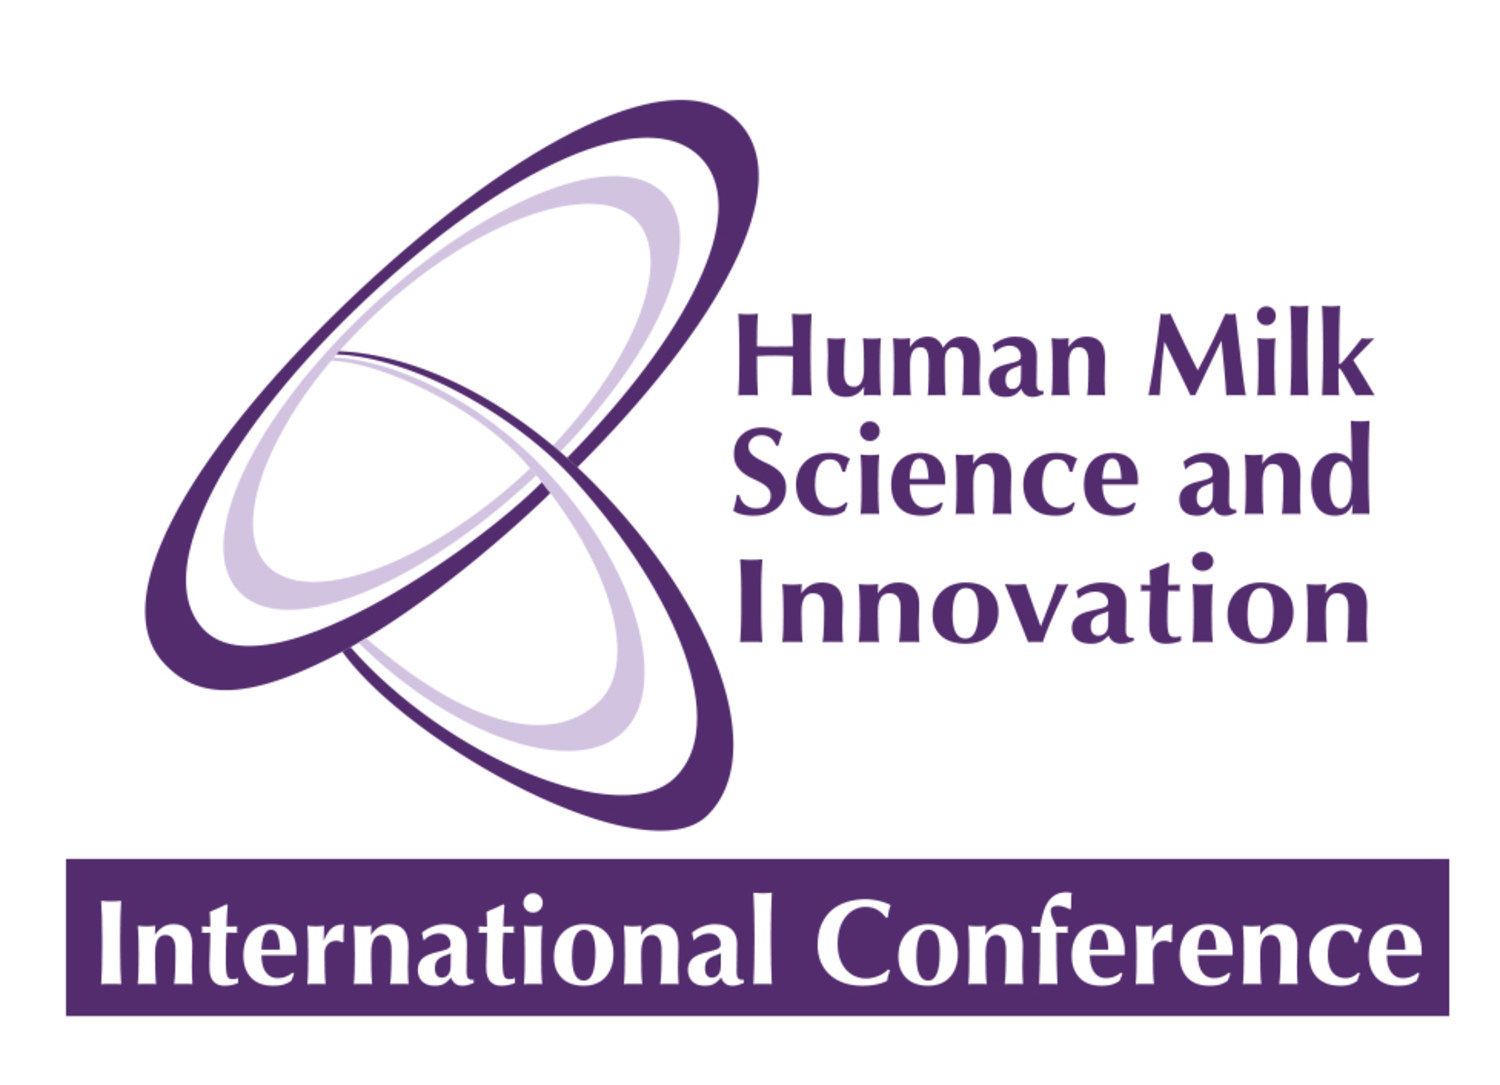 International Conference on Human Milk Science and Innovation